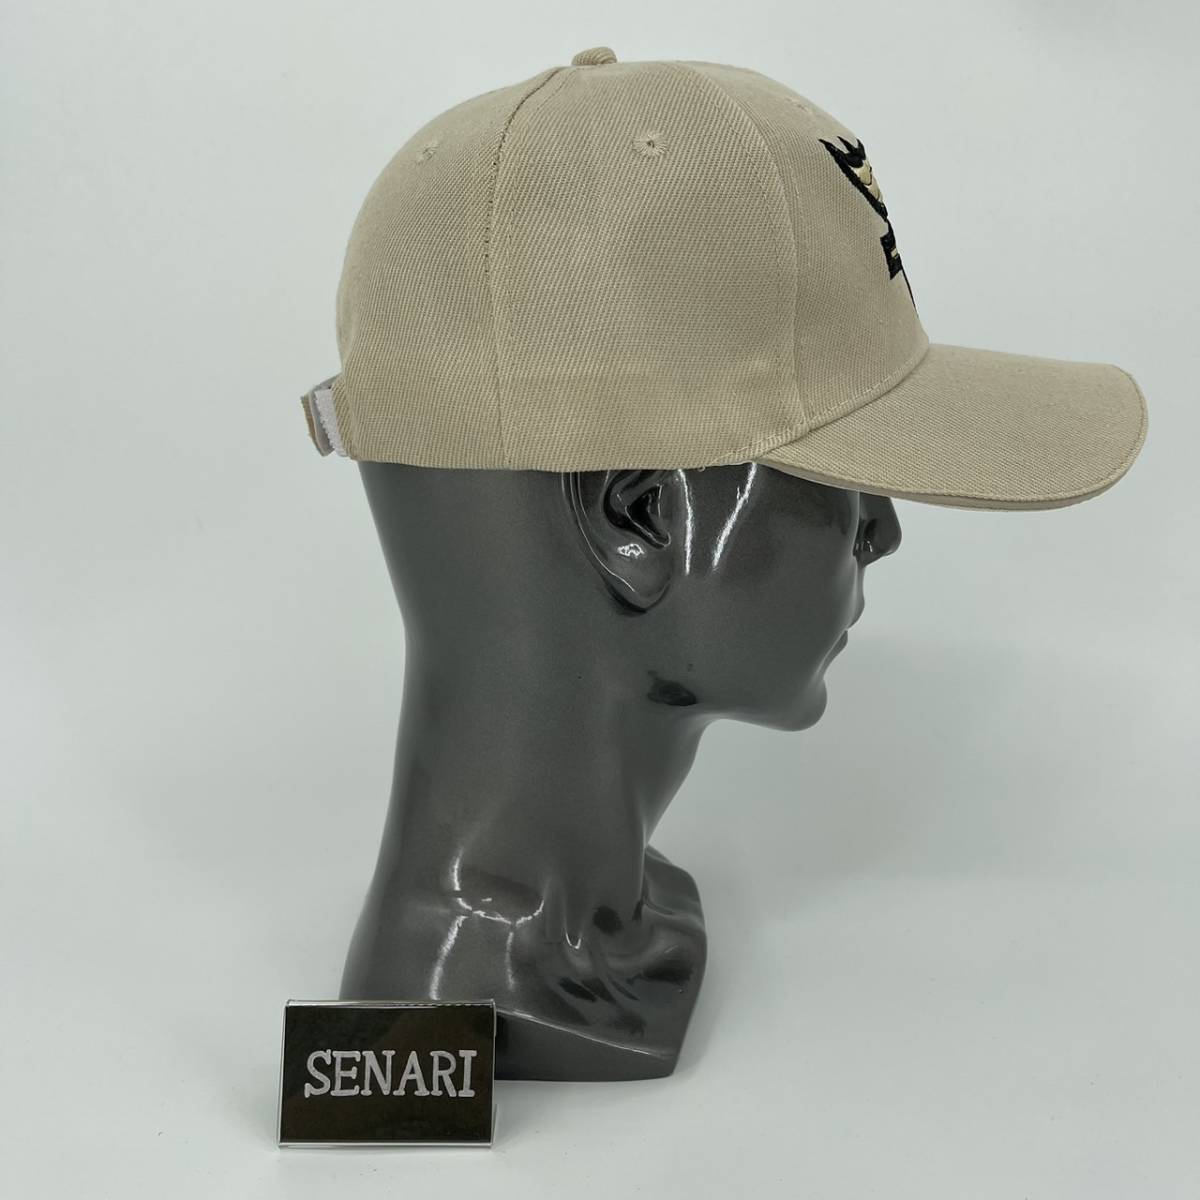 S-1591/ free shipping / airsoft / navy seal z military cap hat Tacty karu unisex men's lady's / beige 